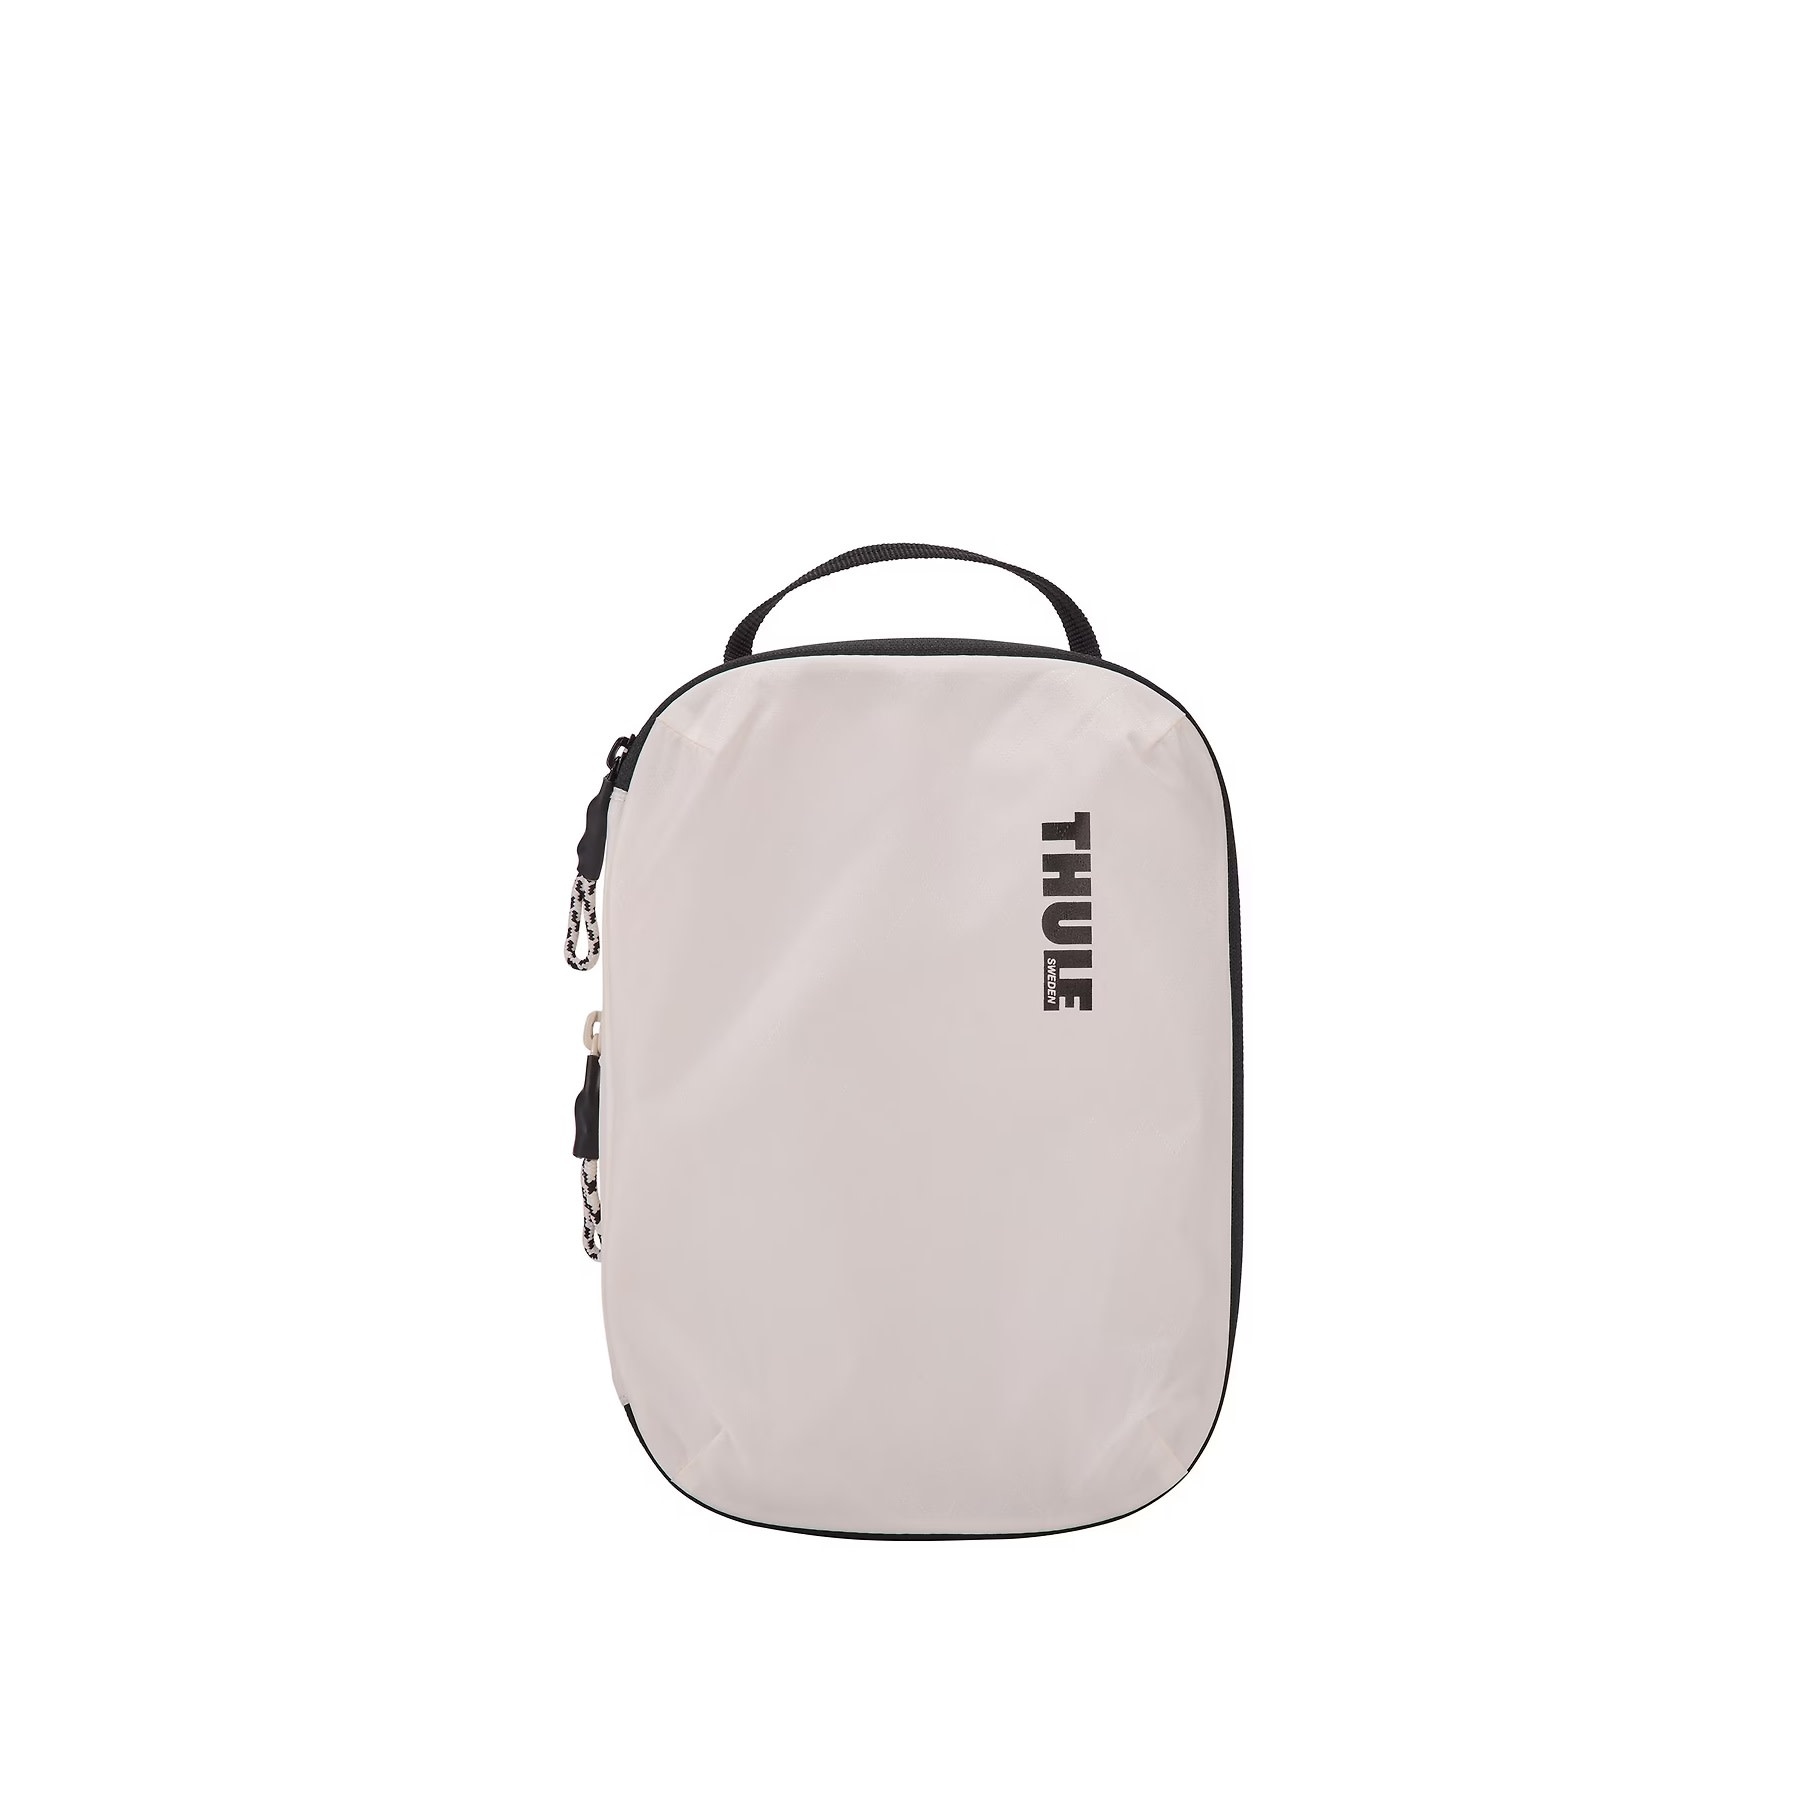 Thule Compression Packing Cube - Small White